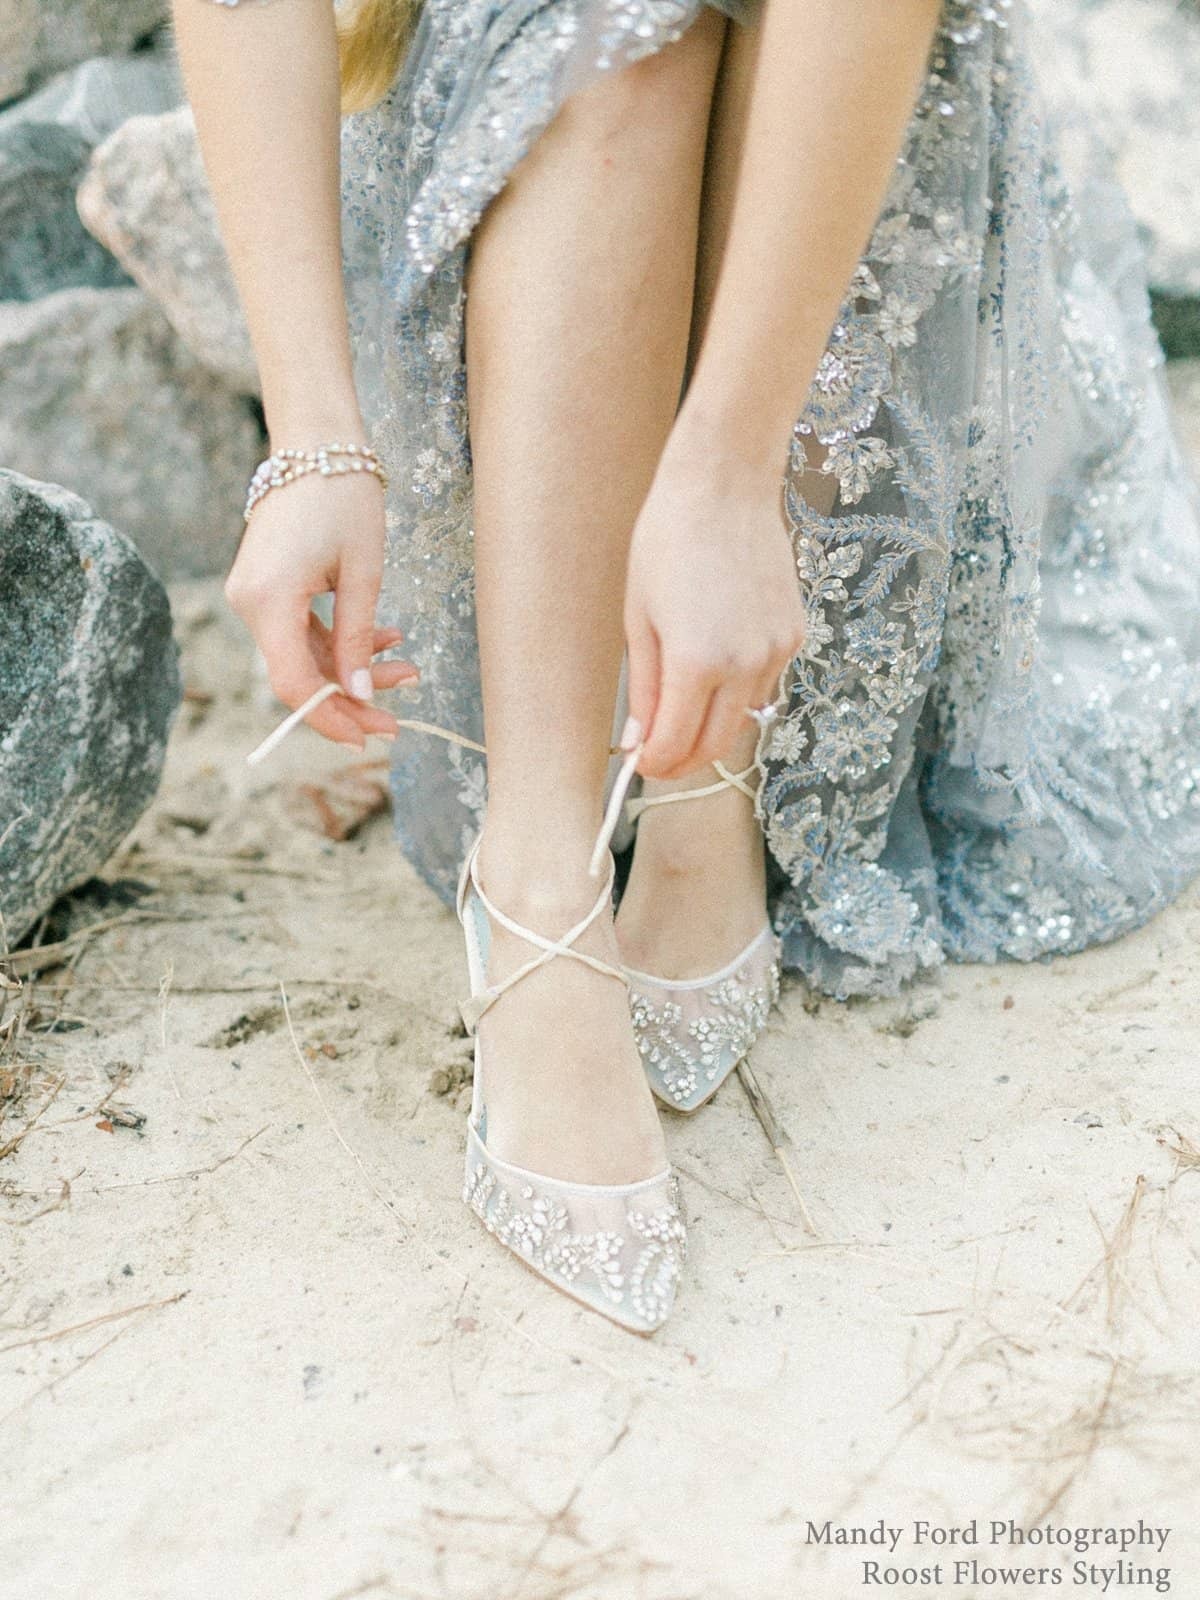 Ivory Crystal Wedding Shoes | Comfortable Shoes for Bride